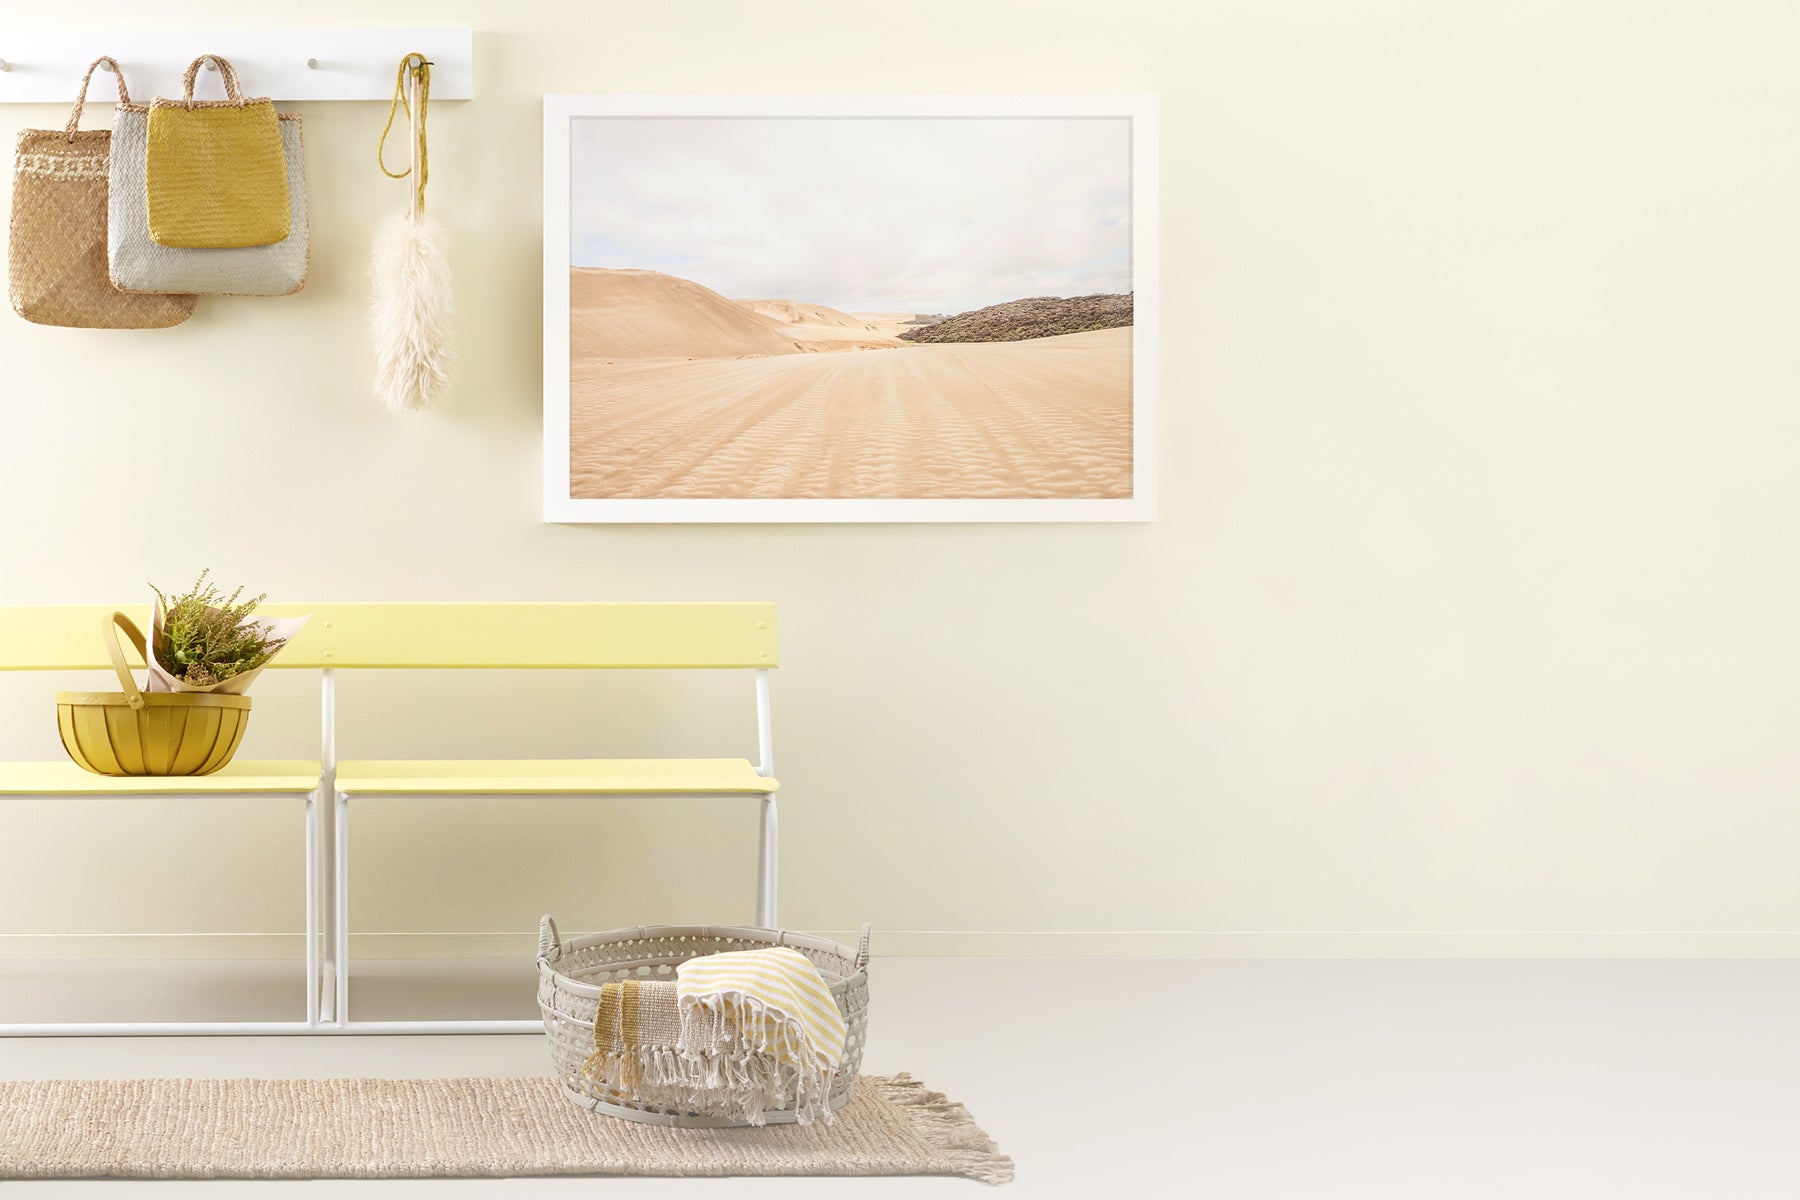 A Step-by-Step Guide to Framing Art Prints at Home